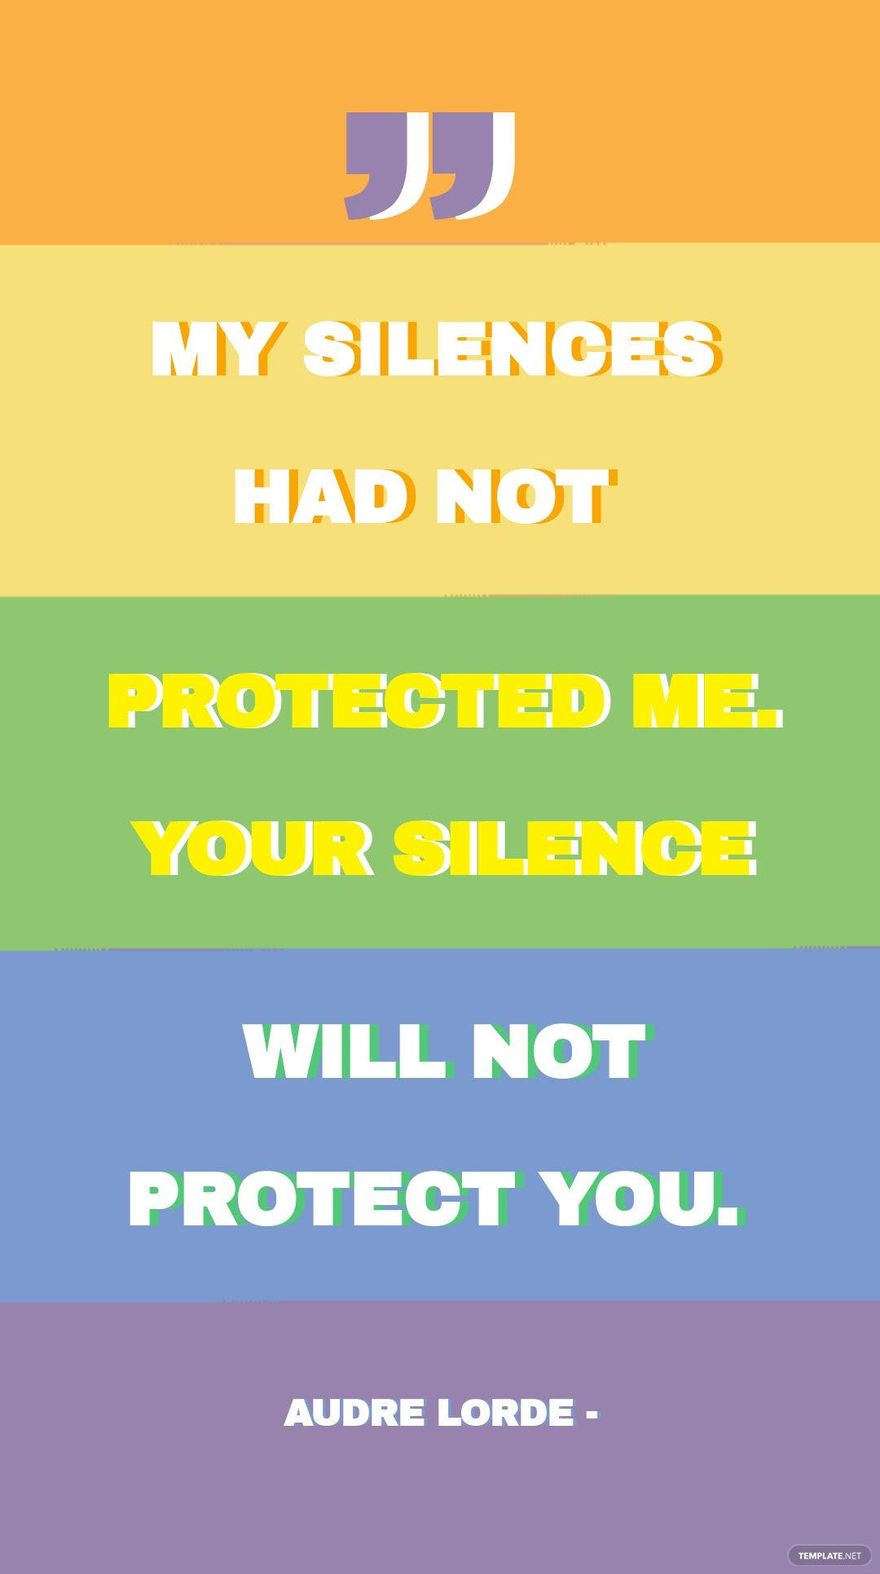 Free Audre Lorde - My silences had not protected me. Your silence will not protect you.